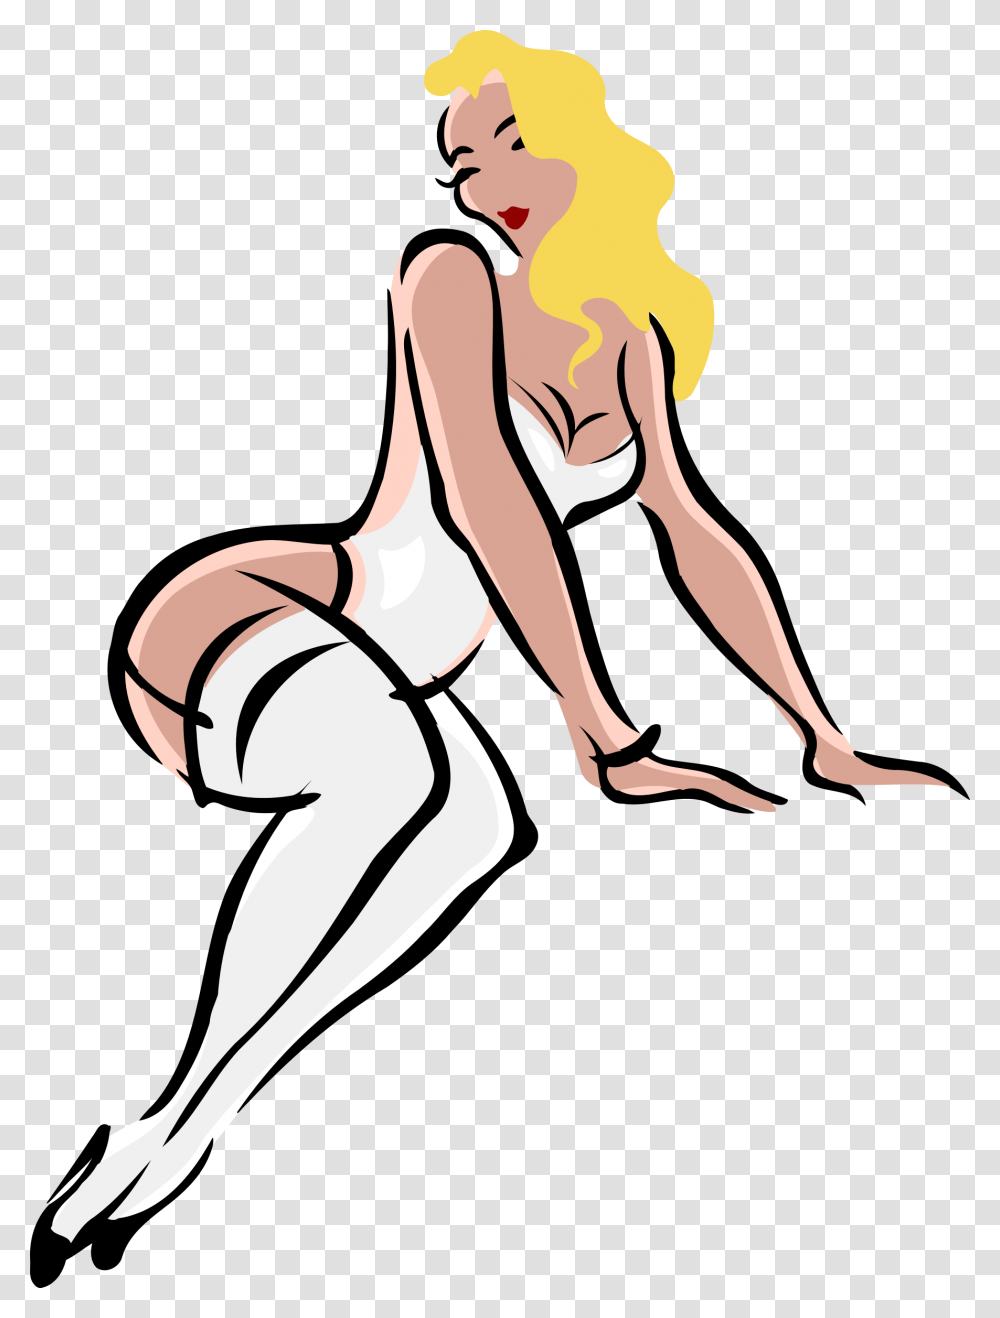 Light Skin Blonde Hair White Clothes Woman In Lingerie Clipart, Person, Human, Dance, Leisure Activities Transparent Png